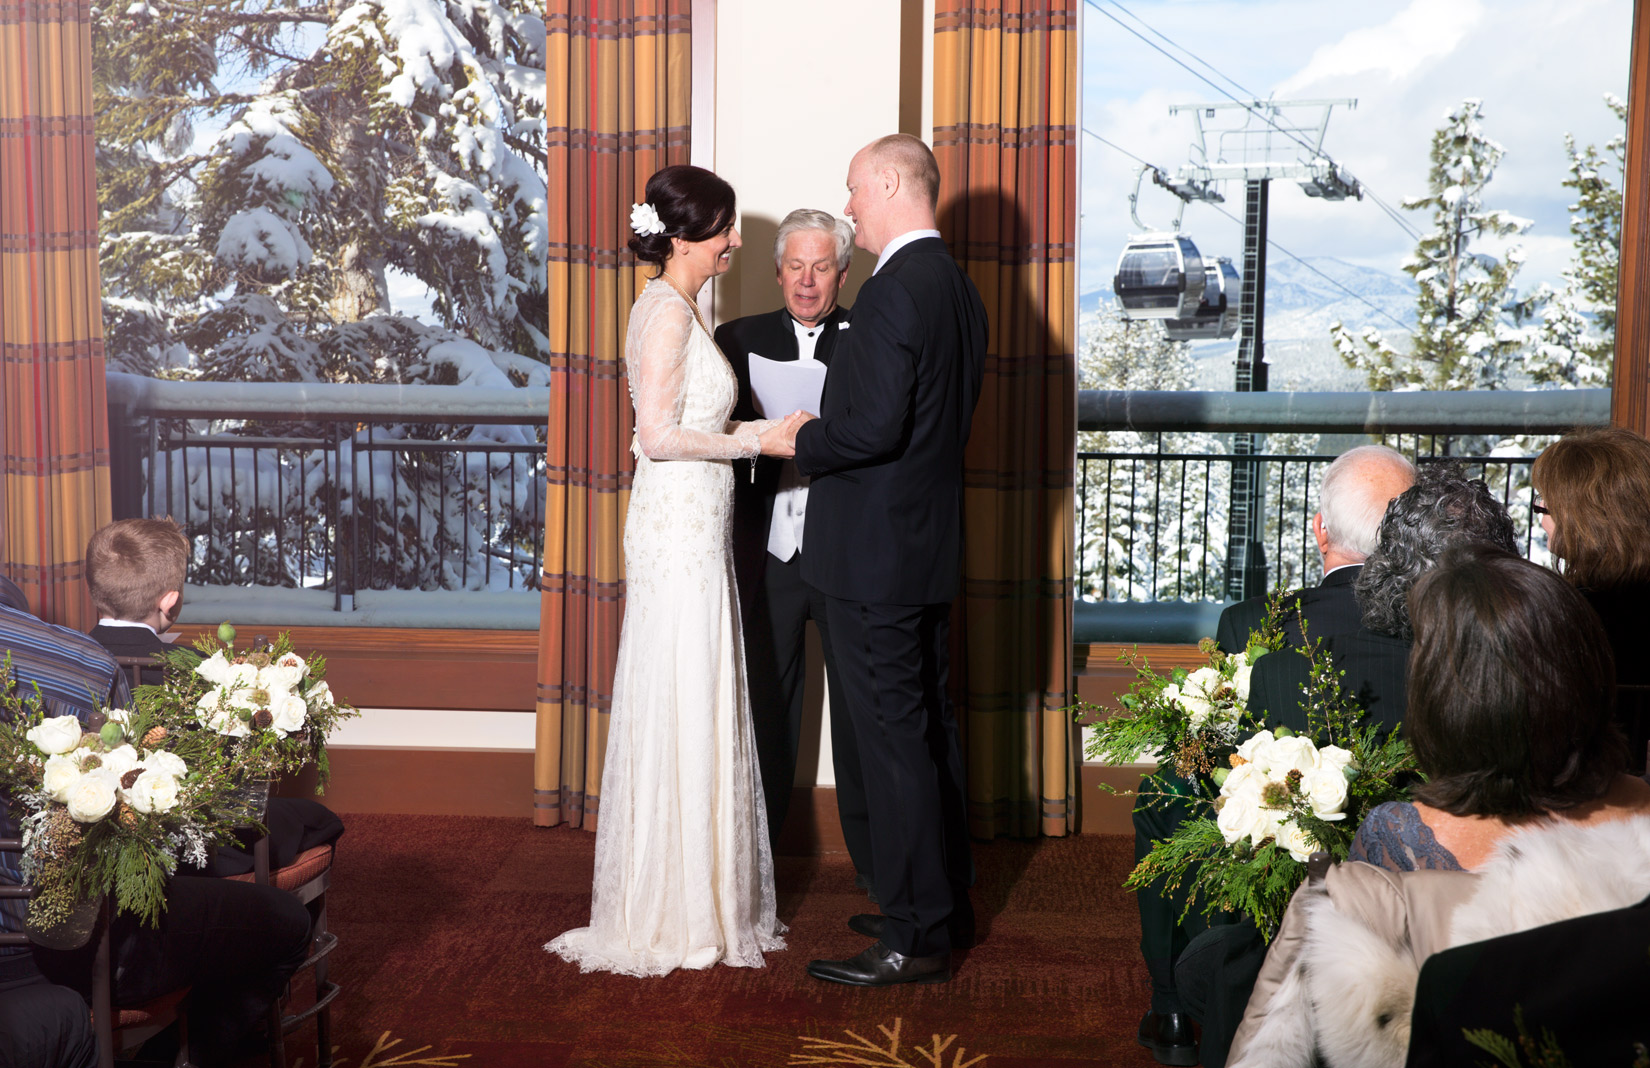       Ceremony at The Ritz-Carlton Highlands Lake Tahoe